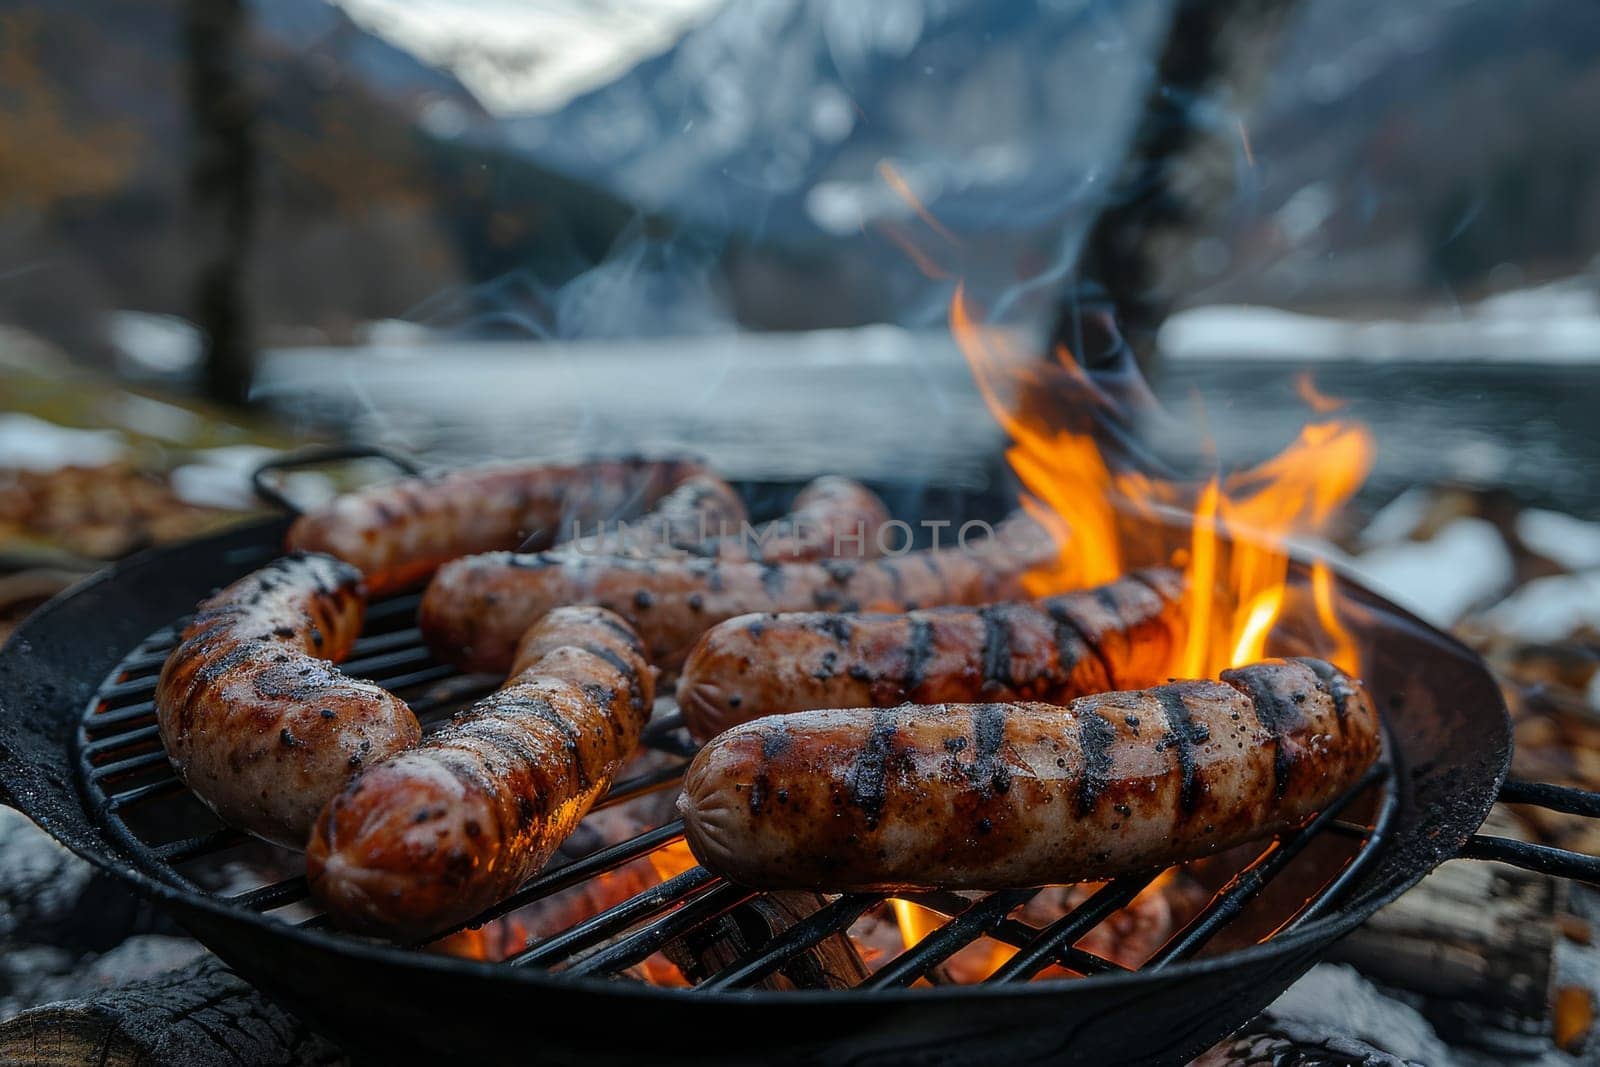 A grill with hot coals and a few hot dogs on it. The hot dogs are being cooked and are surrounded by smoke